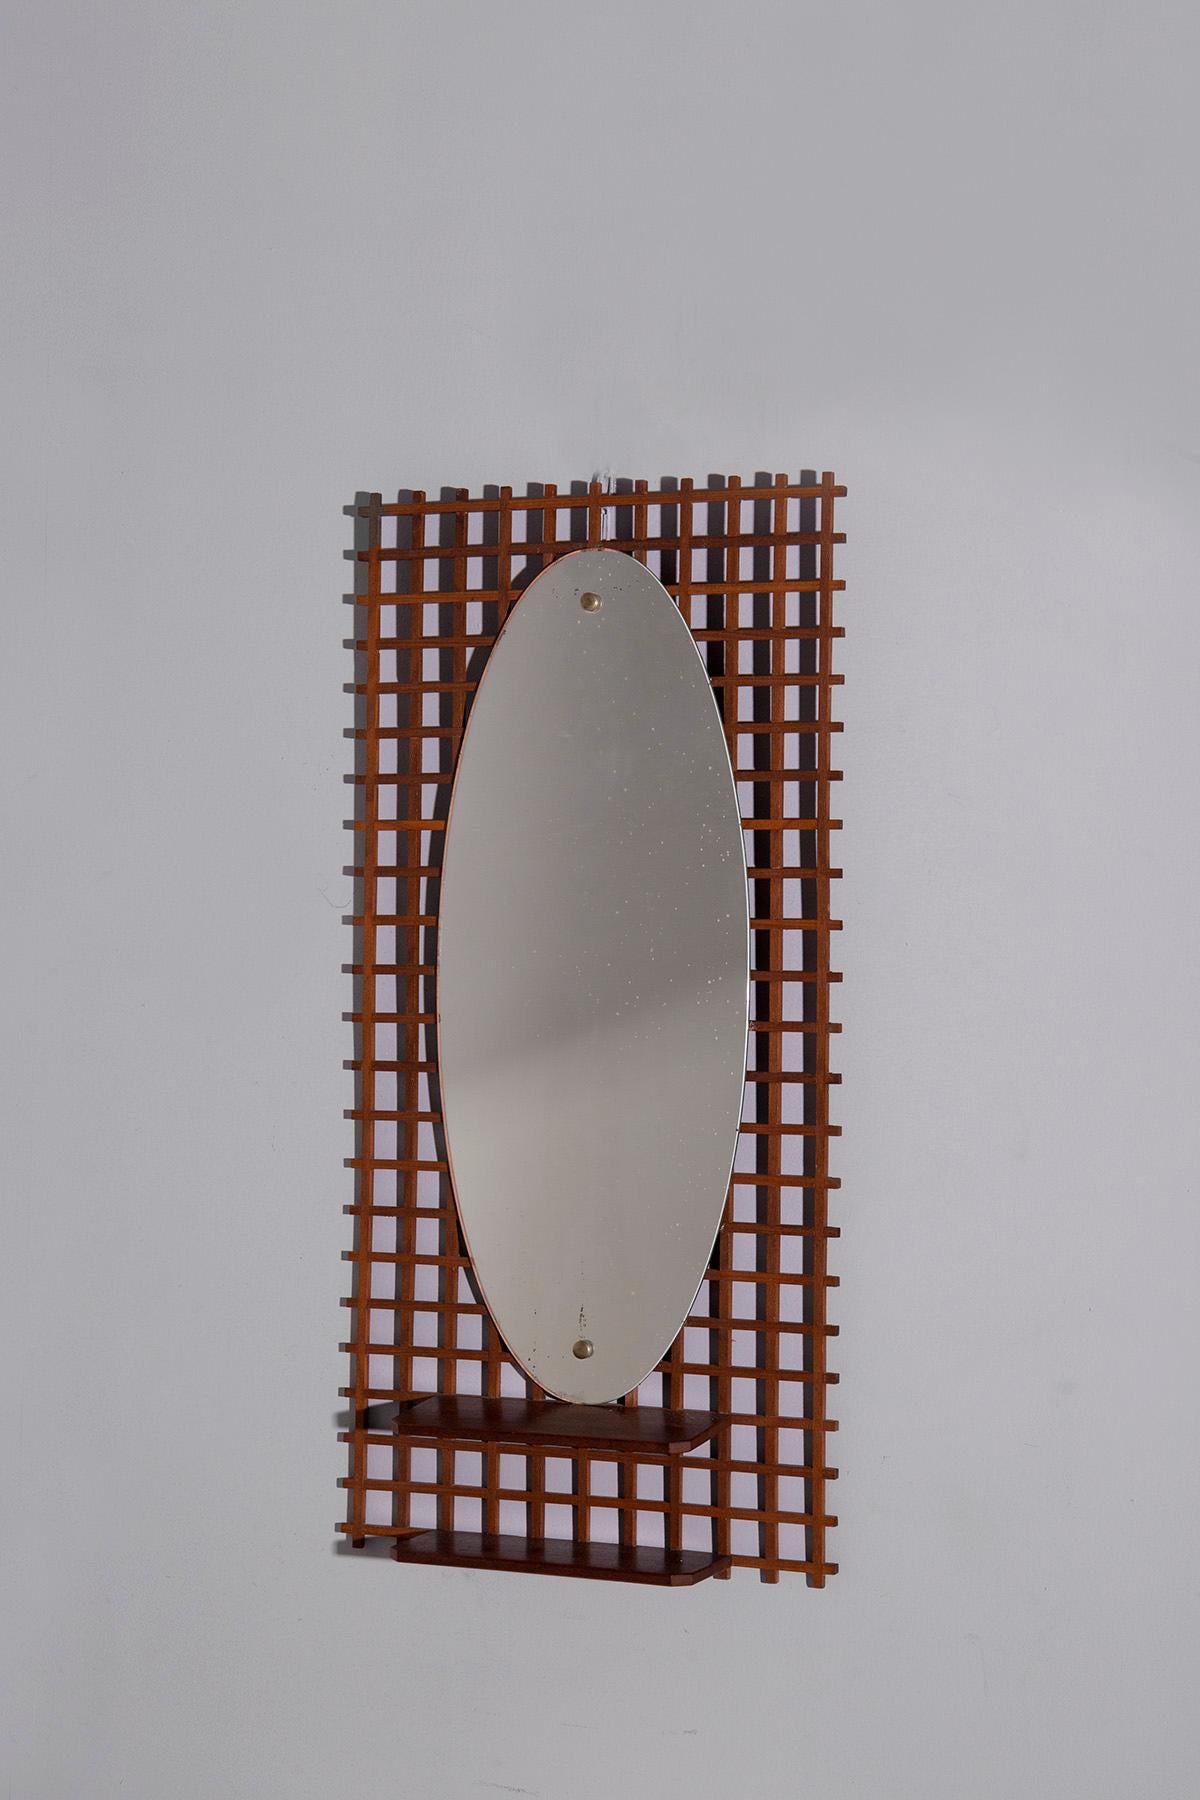 Enter the charm of the 60s, where vintage elegance meets geometric charm in the form of an exquisite Italian mirror. This piece of furniture brings with it the nostalgia of a bygone era, a time when art and craftsmanship were fundamental.

The